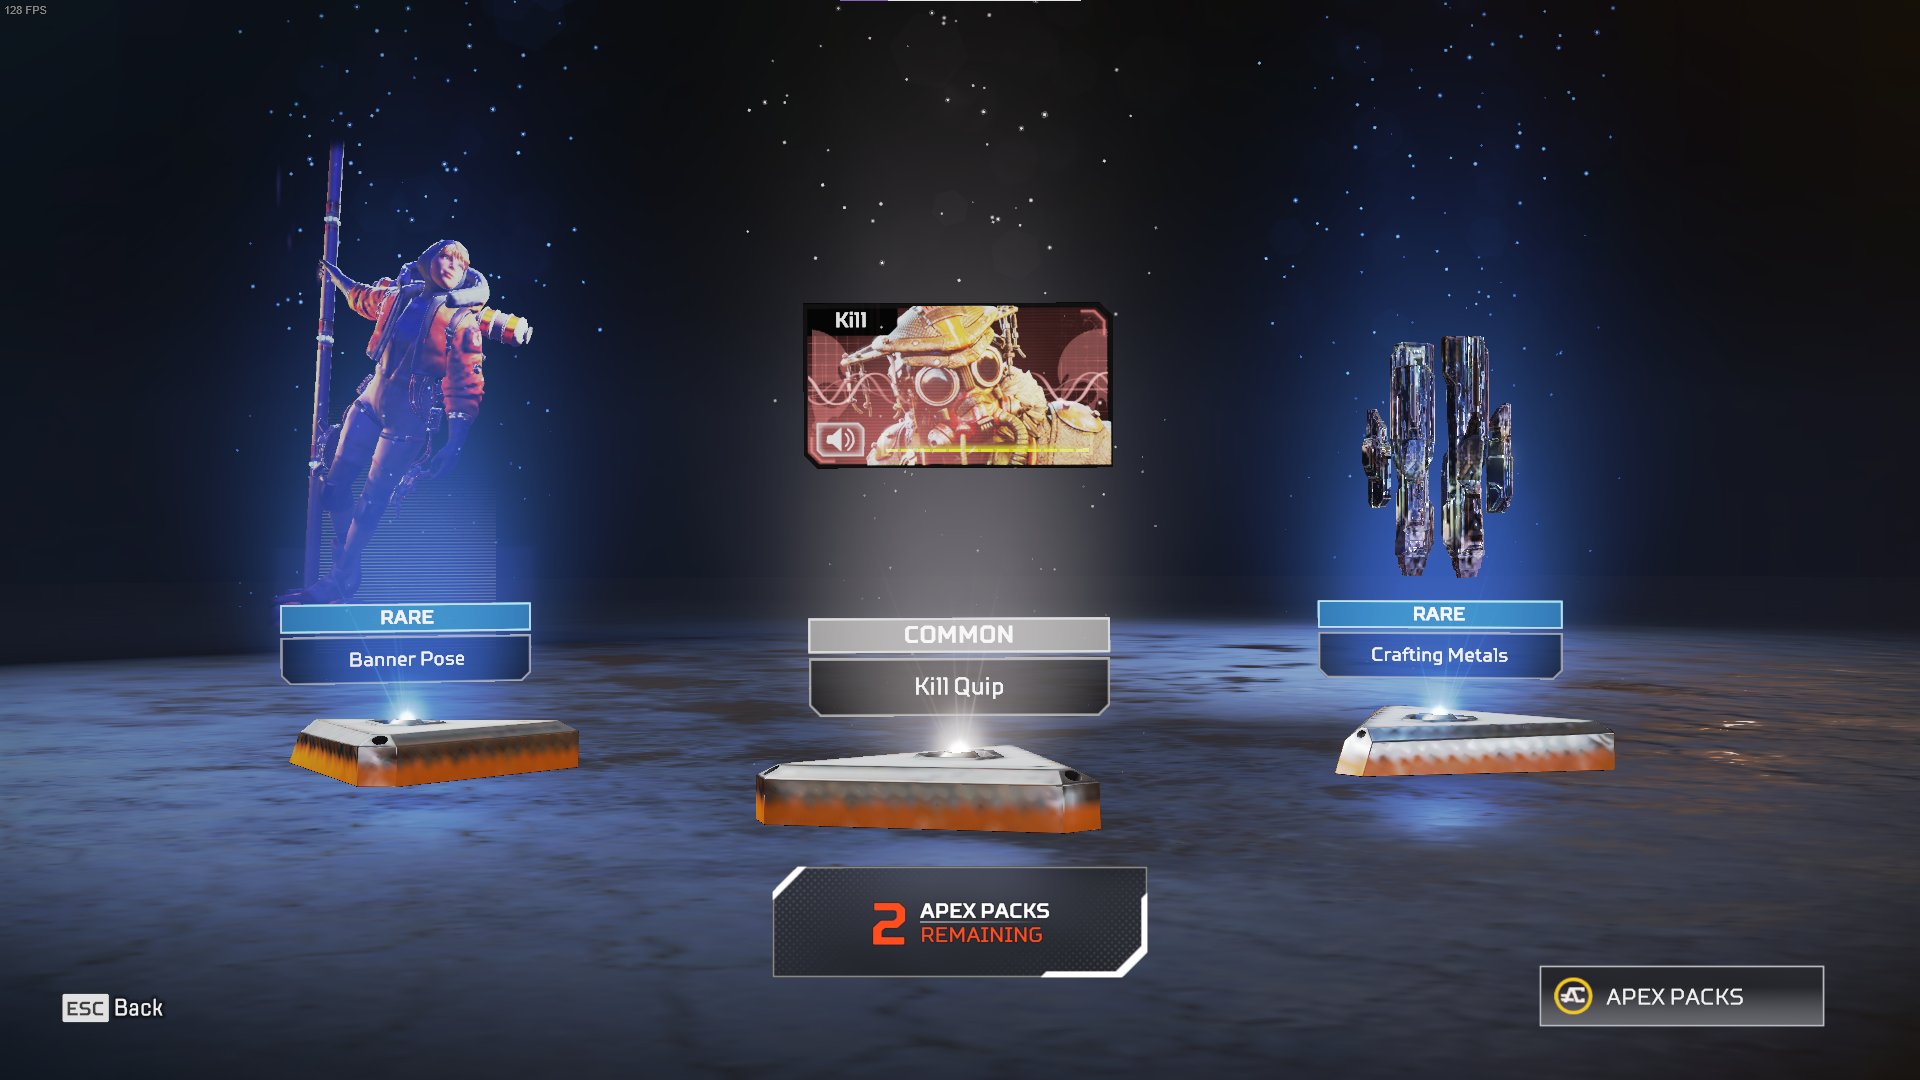 Apex Legends: How to Check How Many Apex Packs You Have Opened